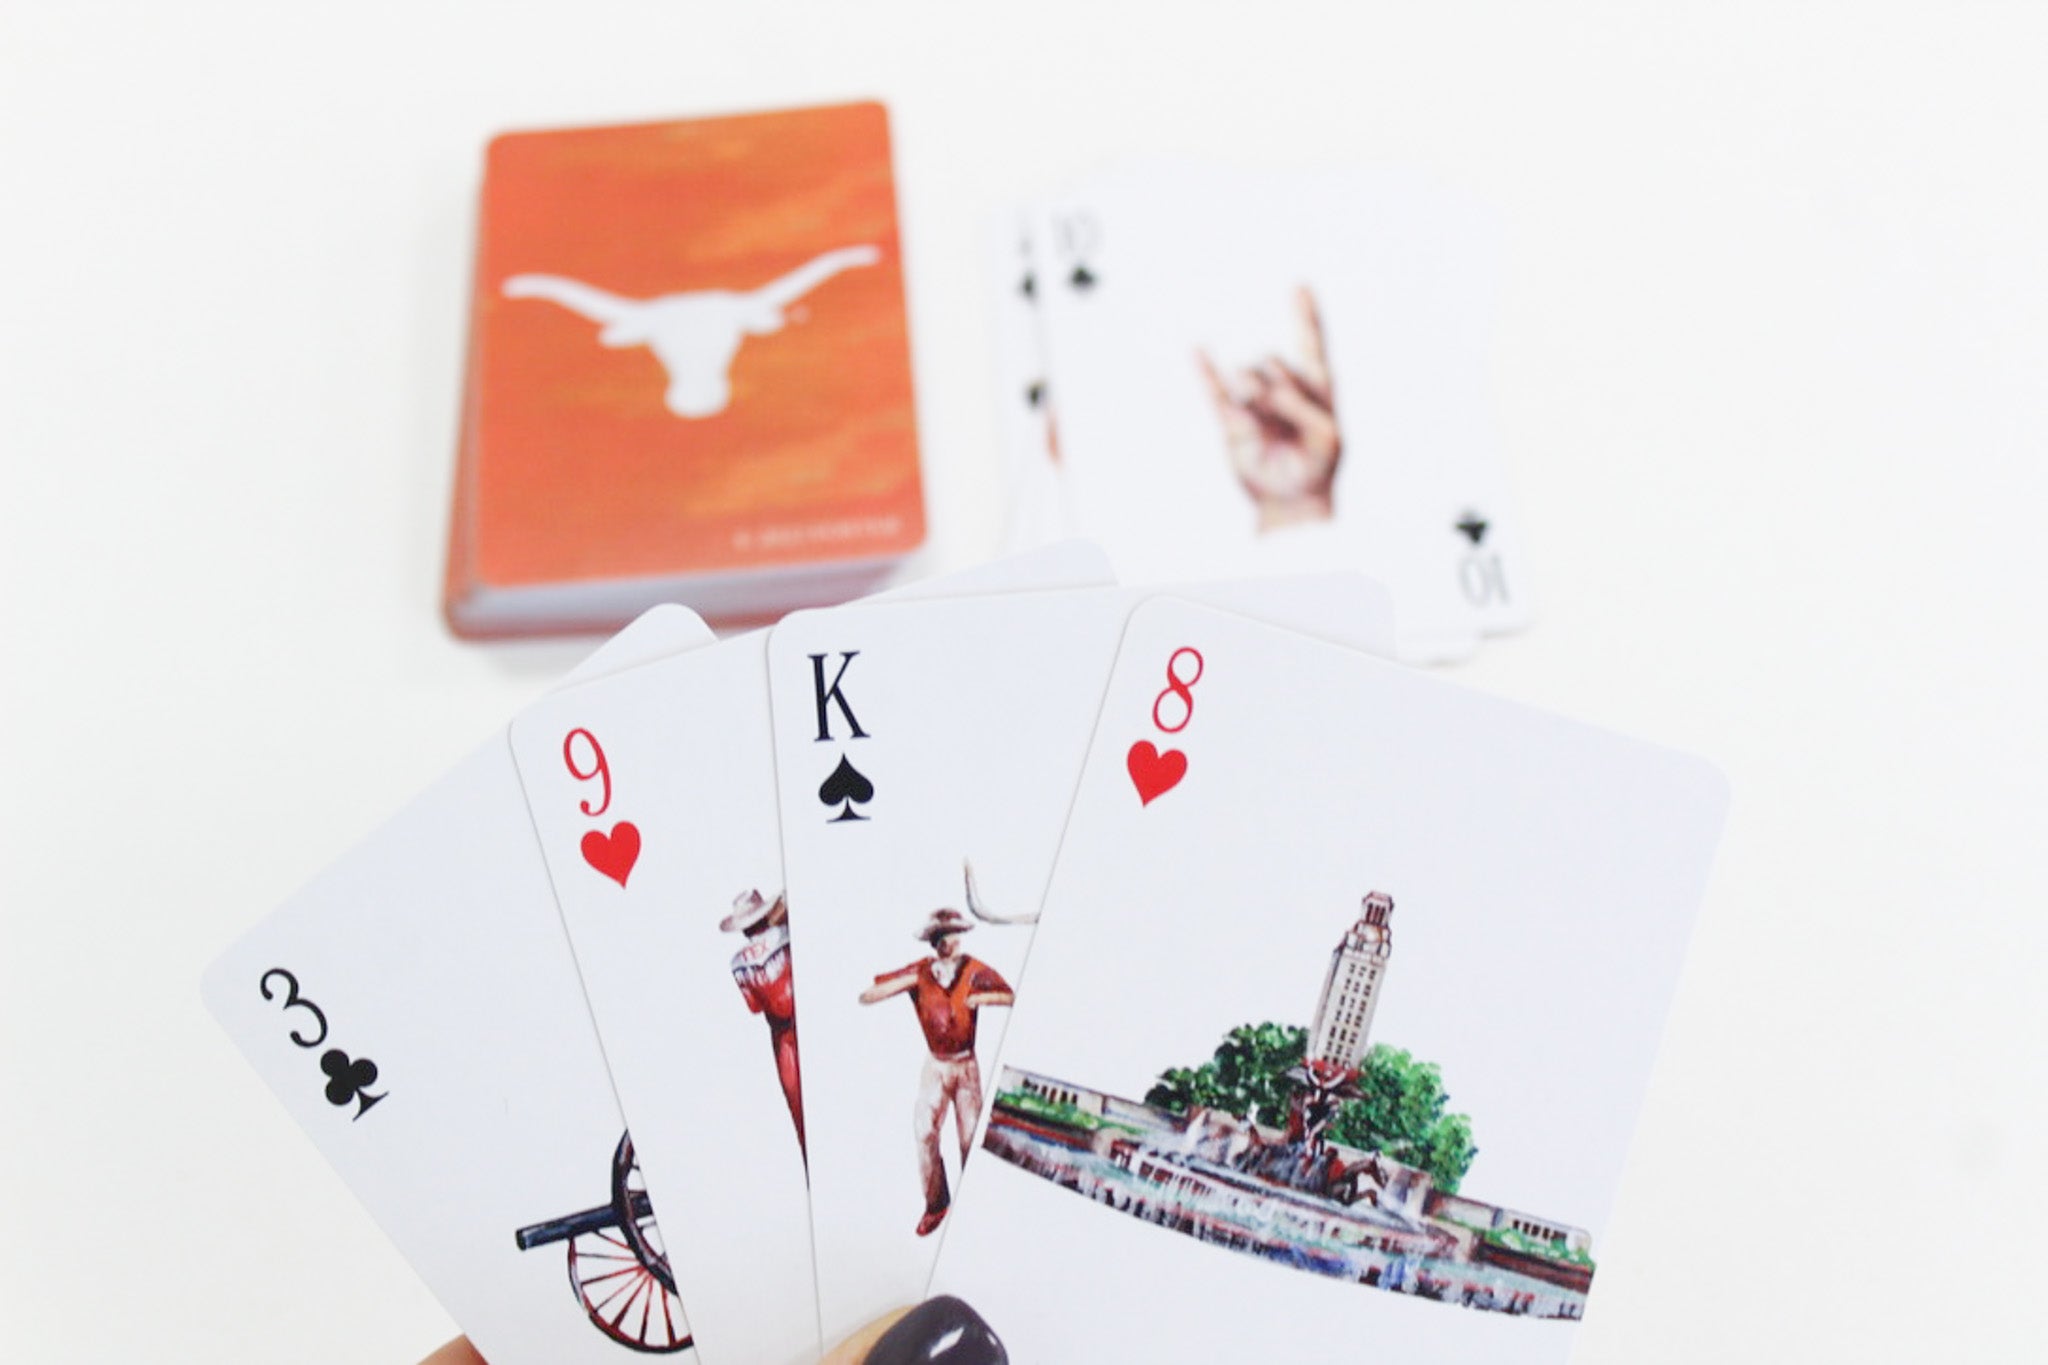 UT Austin playing cards by FOSTER